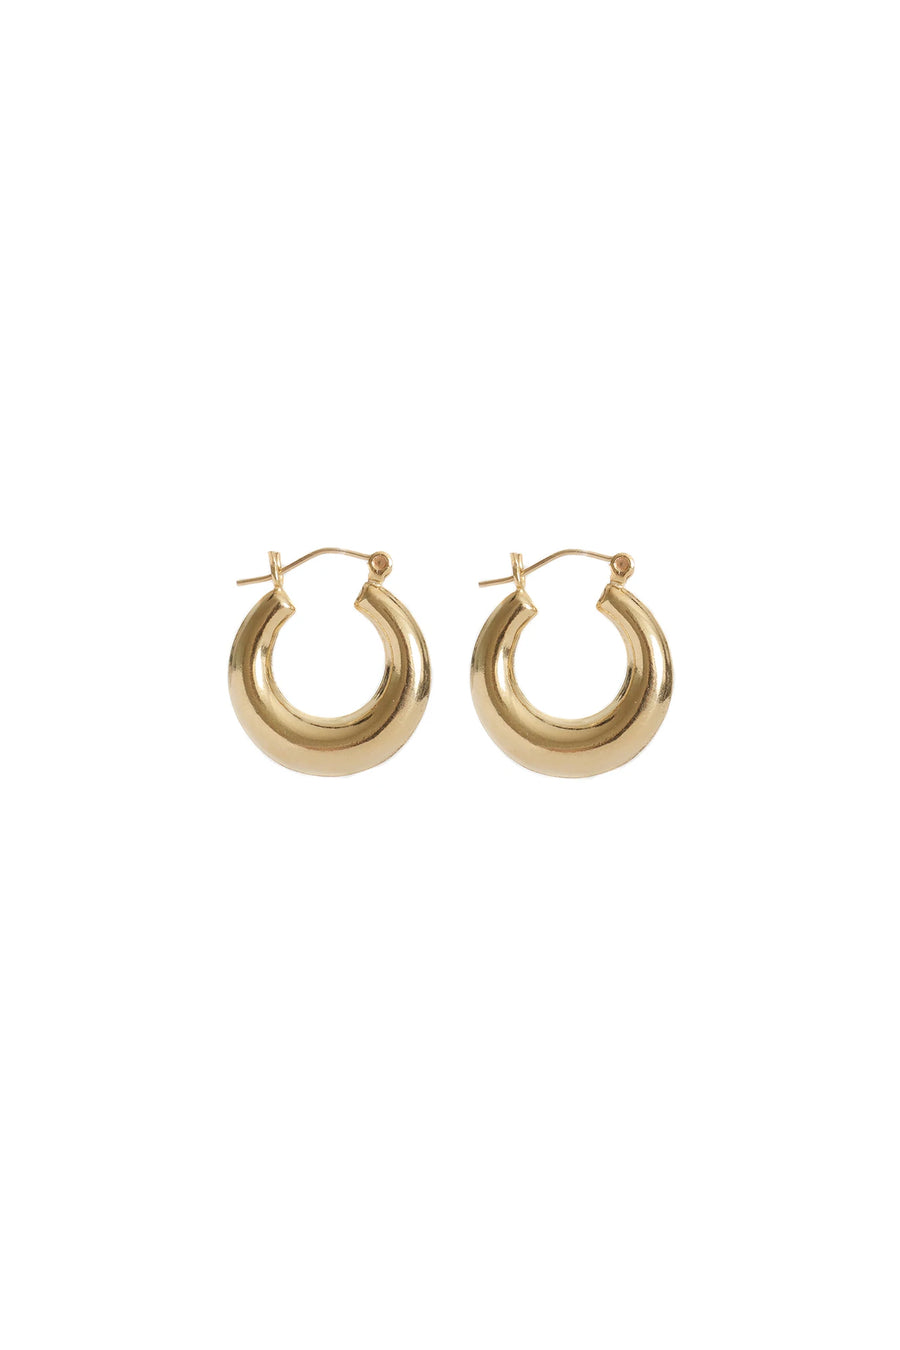 LISBETH JEWELRY - HAILEY HOOPS - 14K GOLD FILLED